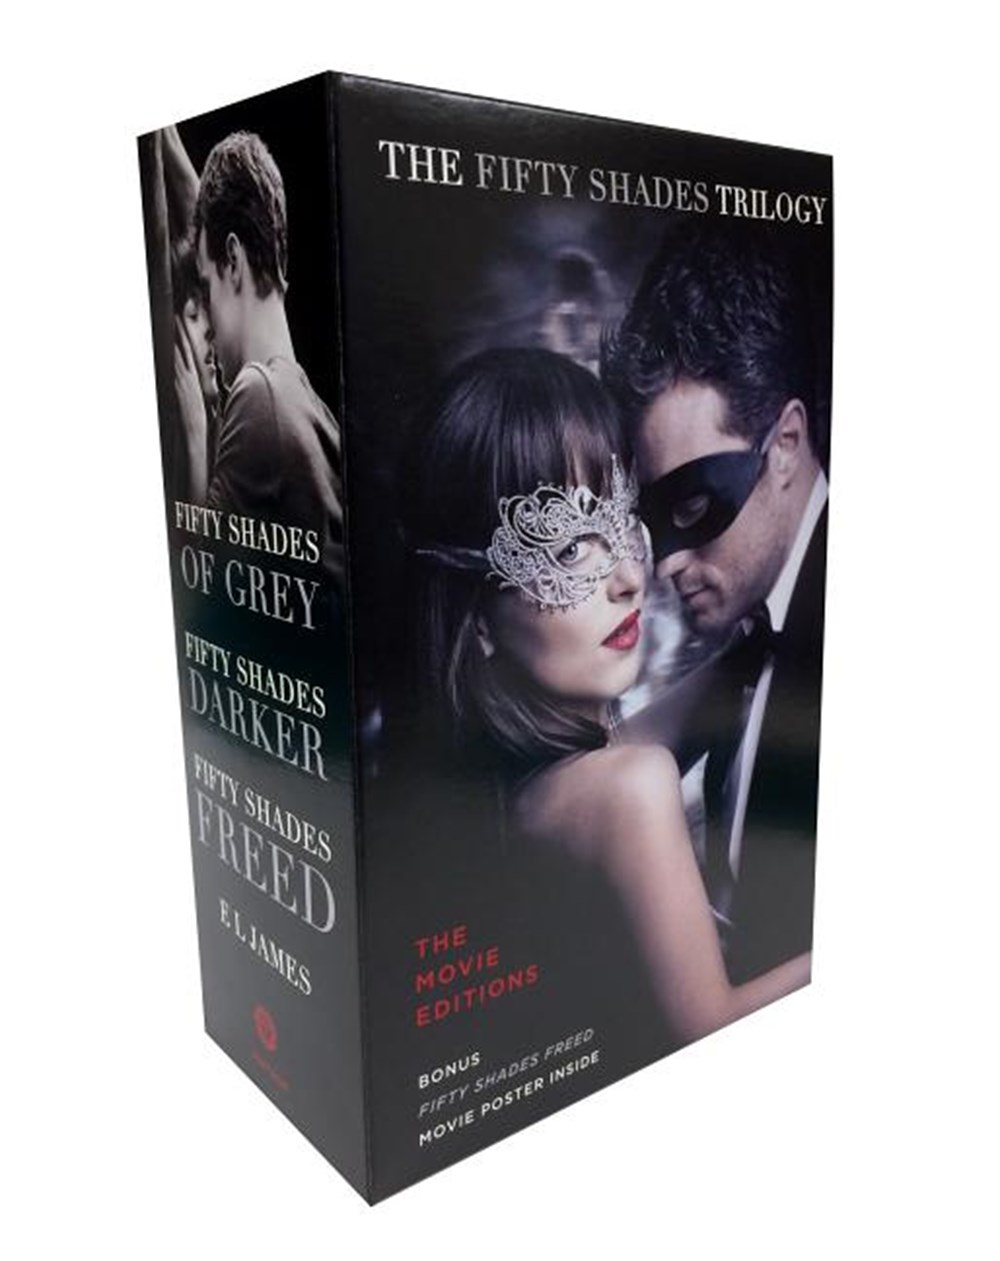 Buy Fifty Shades Trilogy The Movie Tie In Editions With Bonus Poster Fifty Shades Of Grey Fifty Shades Darker Fifty Shades Freed By E L James From Porchlight Book Company